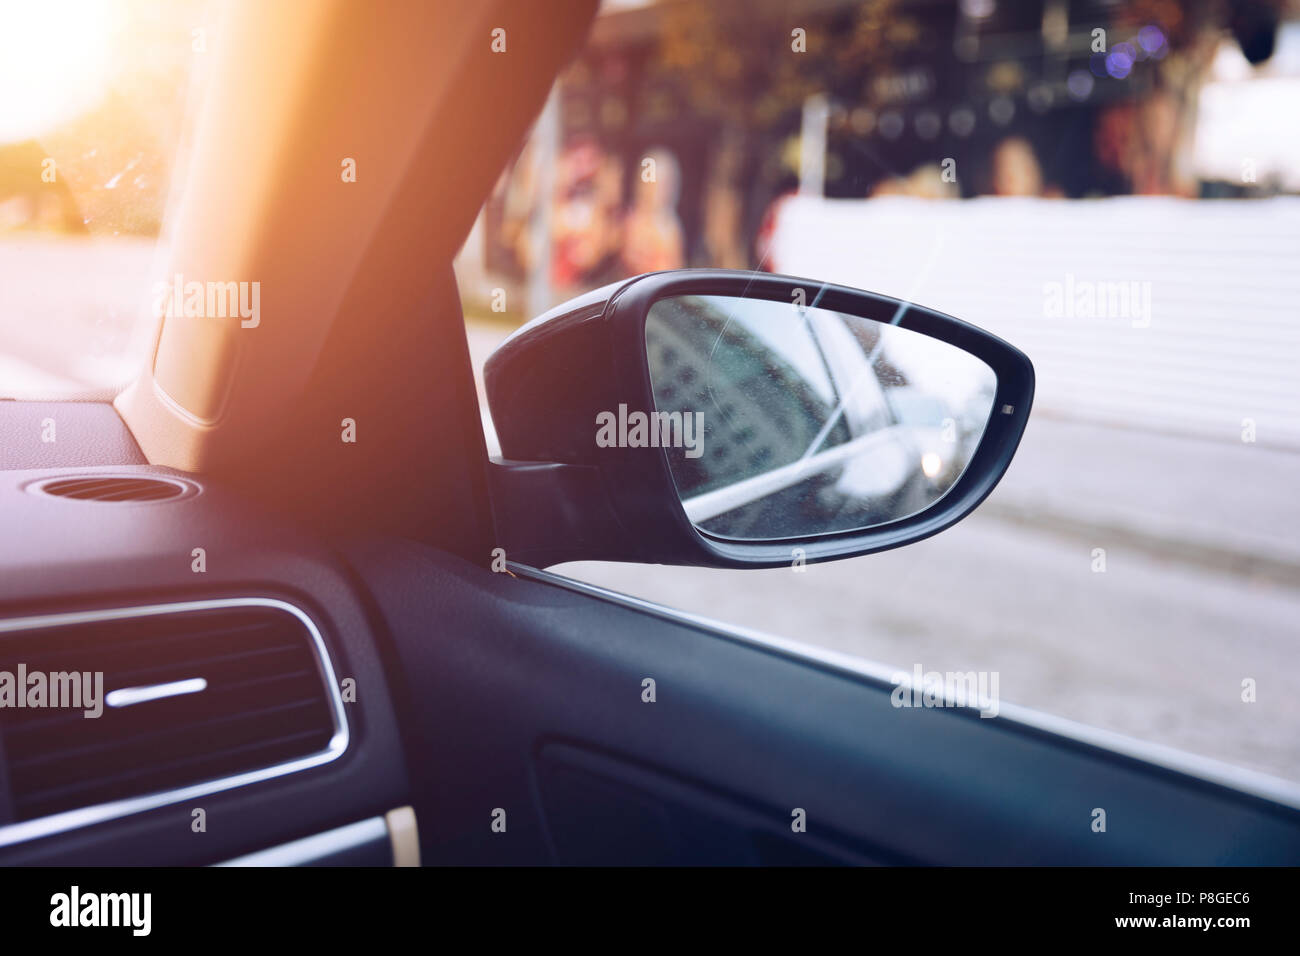 Shoot in side-view mirror of car. View from a side mirror of a car while cruising on a highway Stock Photo